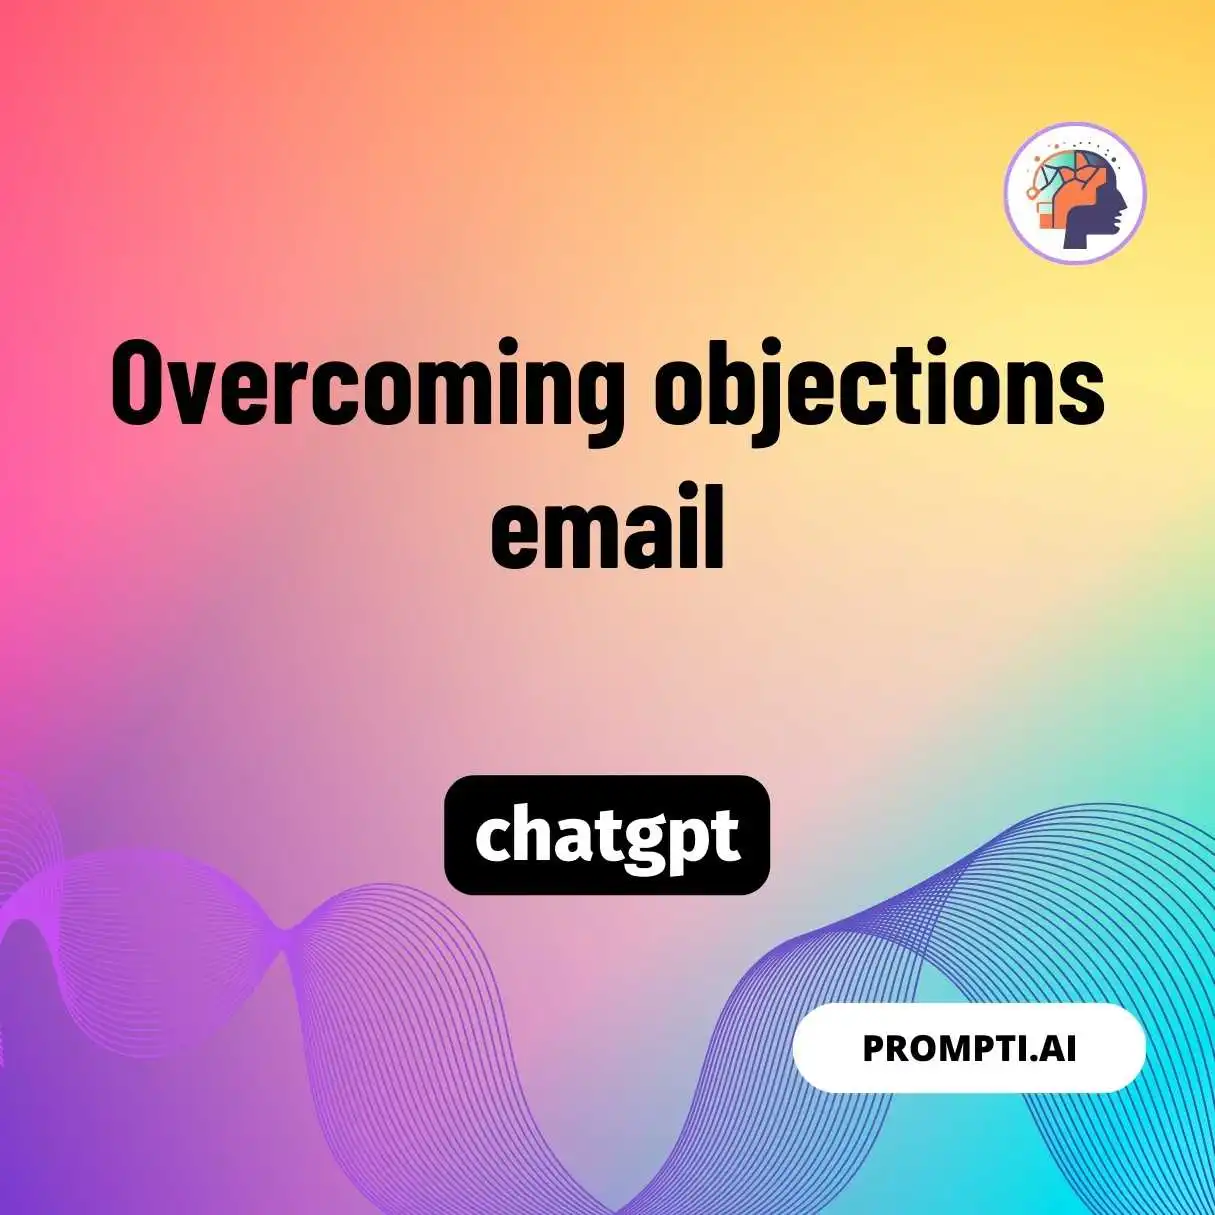 Overcoming objections email